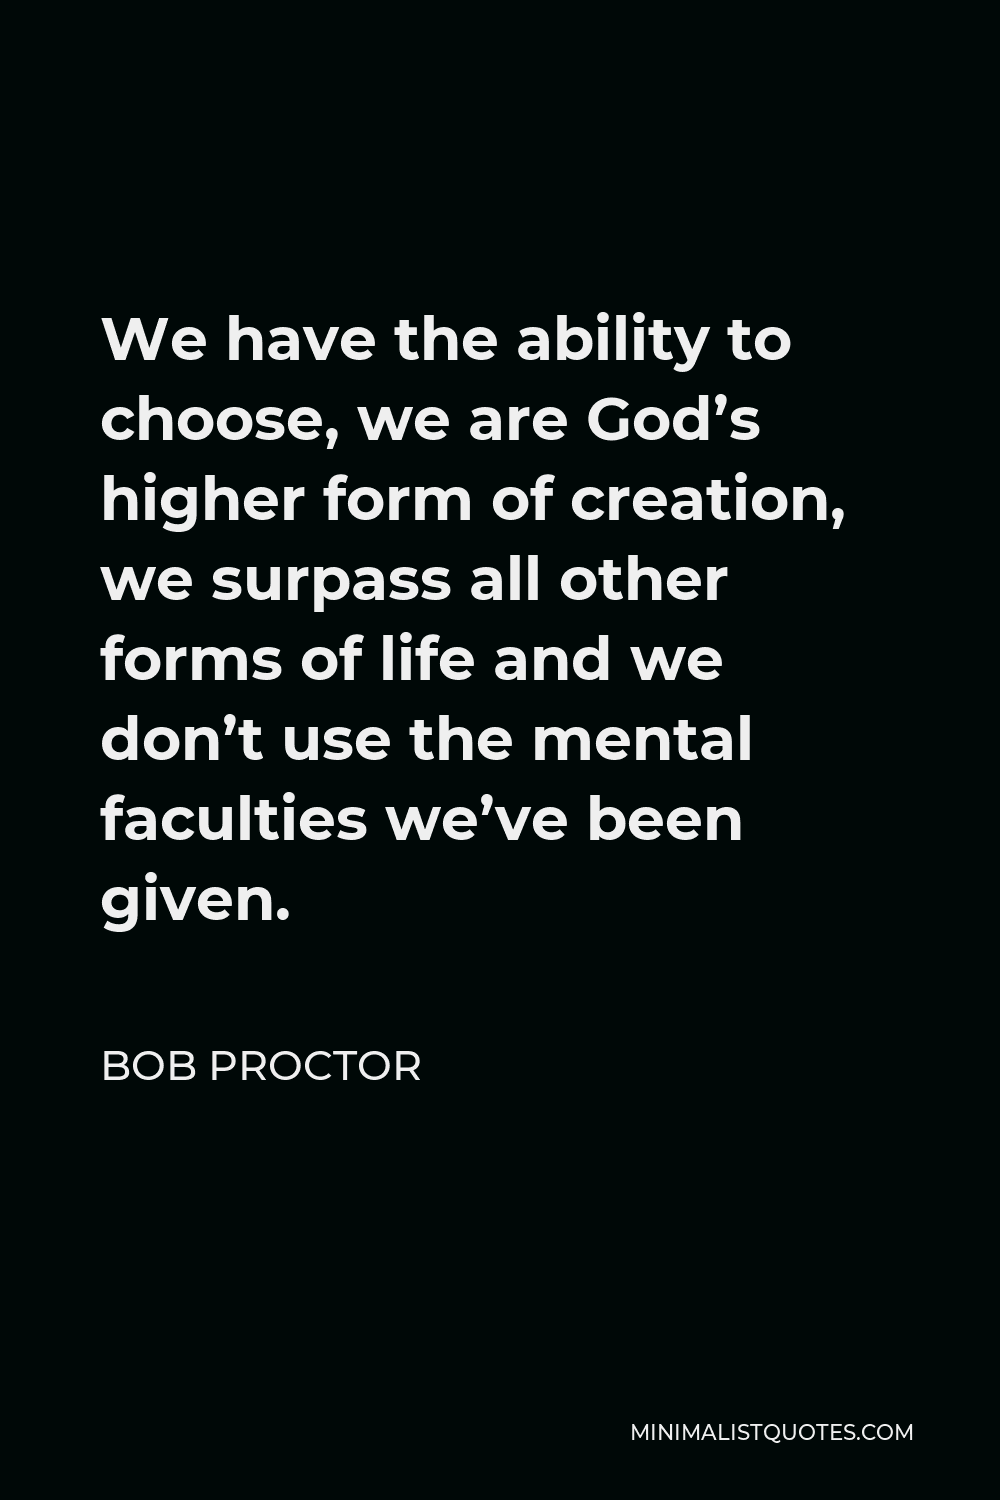 Bob Proctor Quote - We have the ability to choose, we are God’s higher form of creation, we surpass all other forms of life and we don’t use the mental faculties we’ve been given.